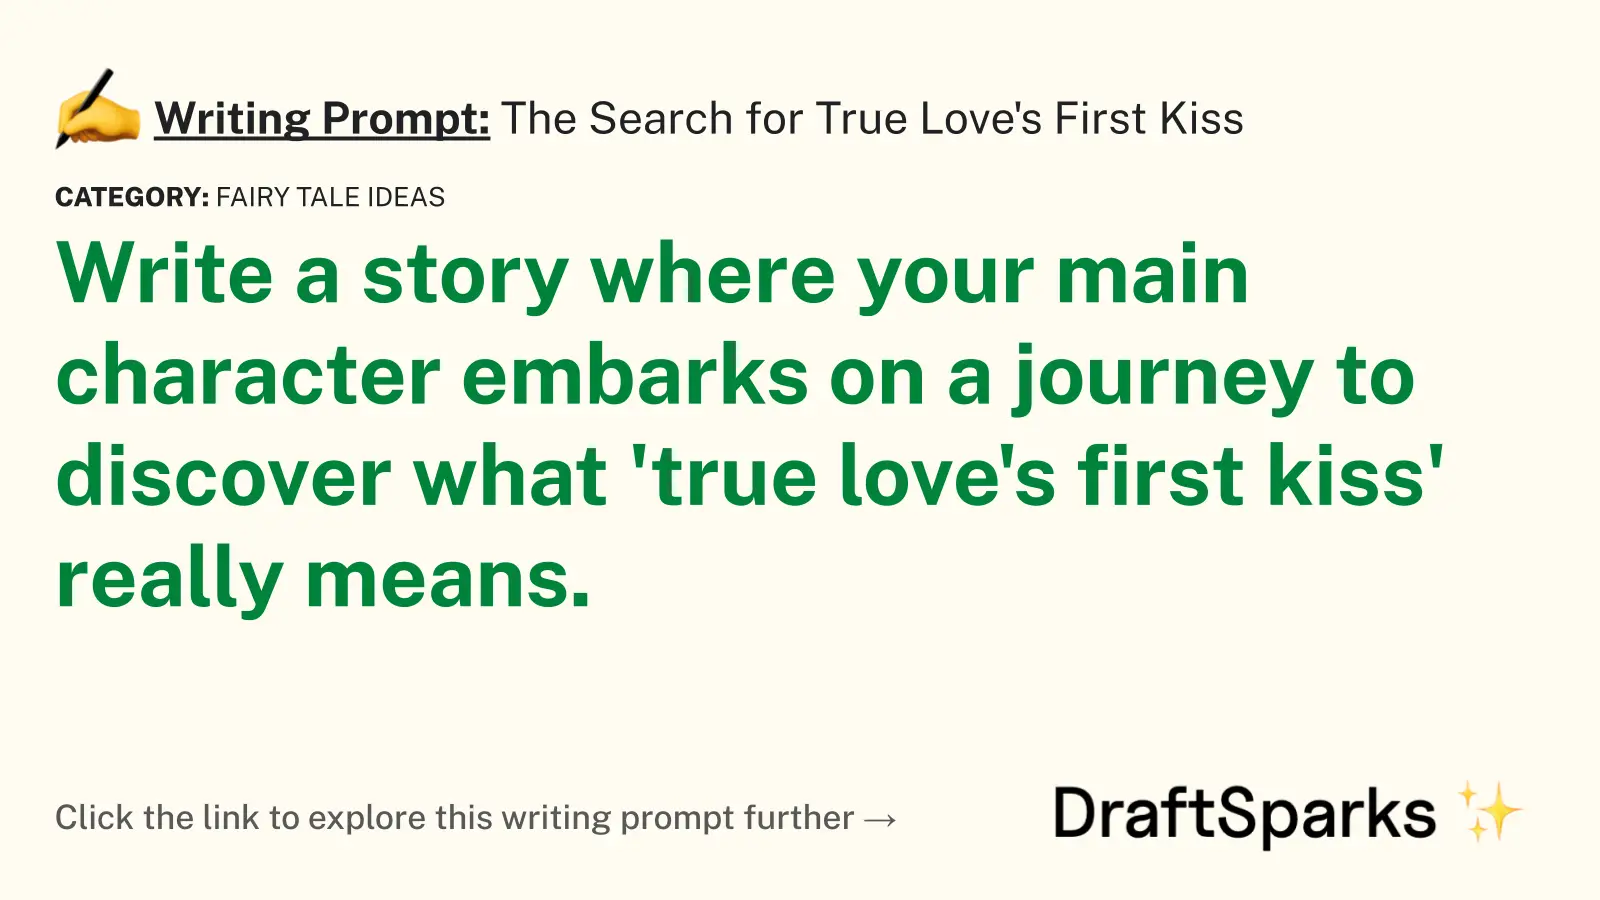 The Search for True Love’s First Kiss